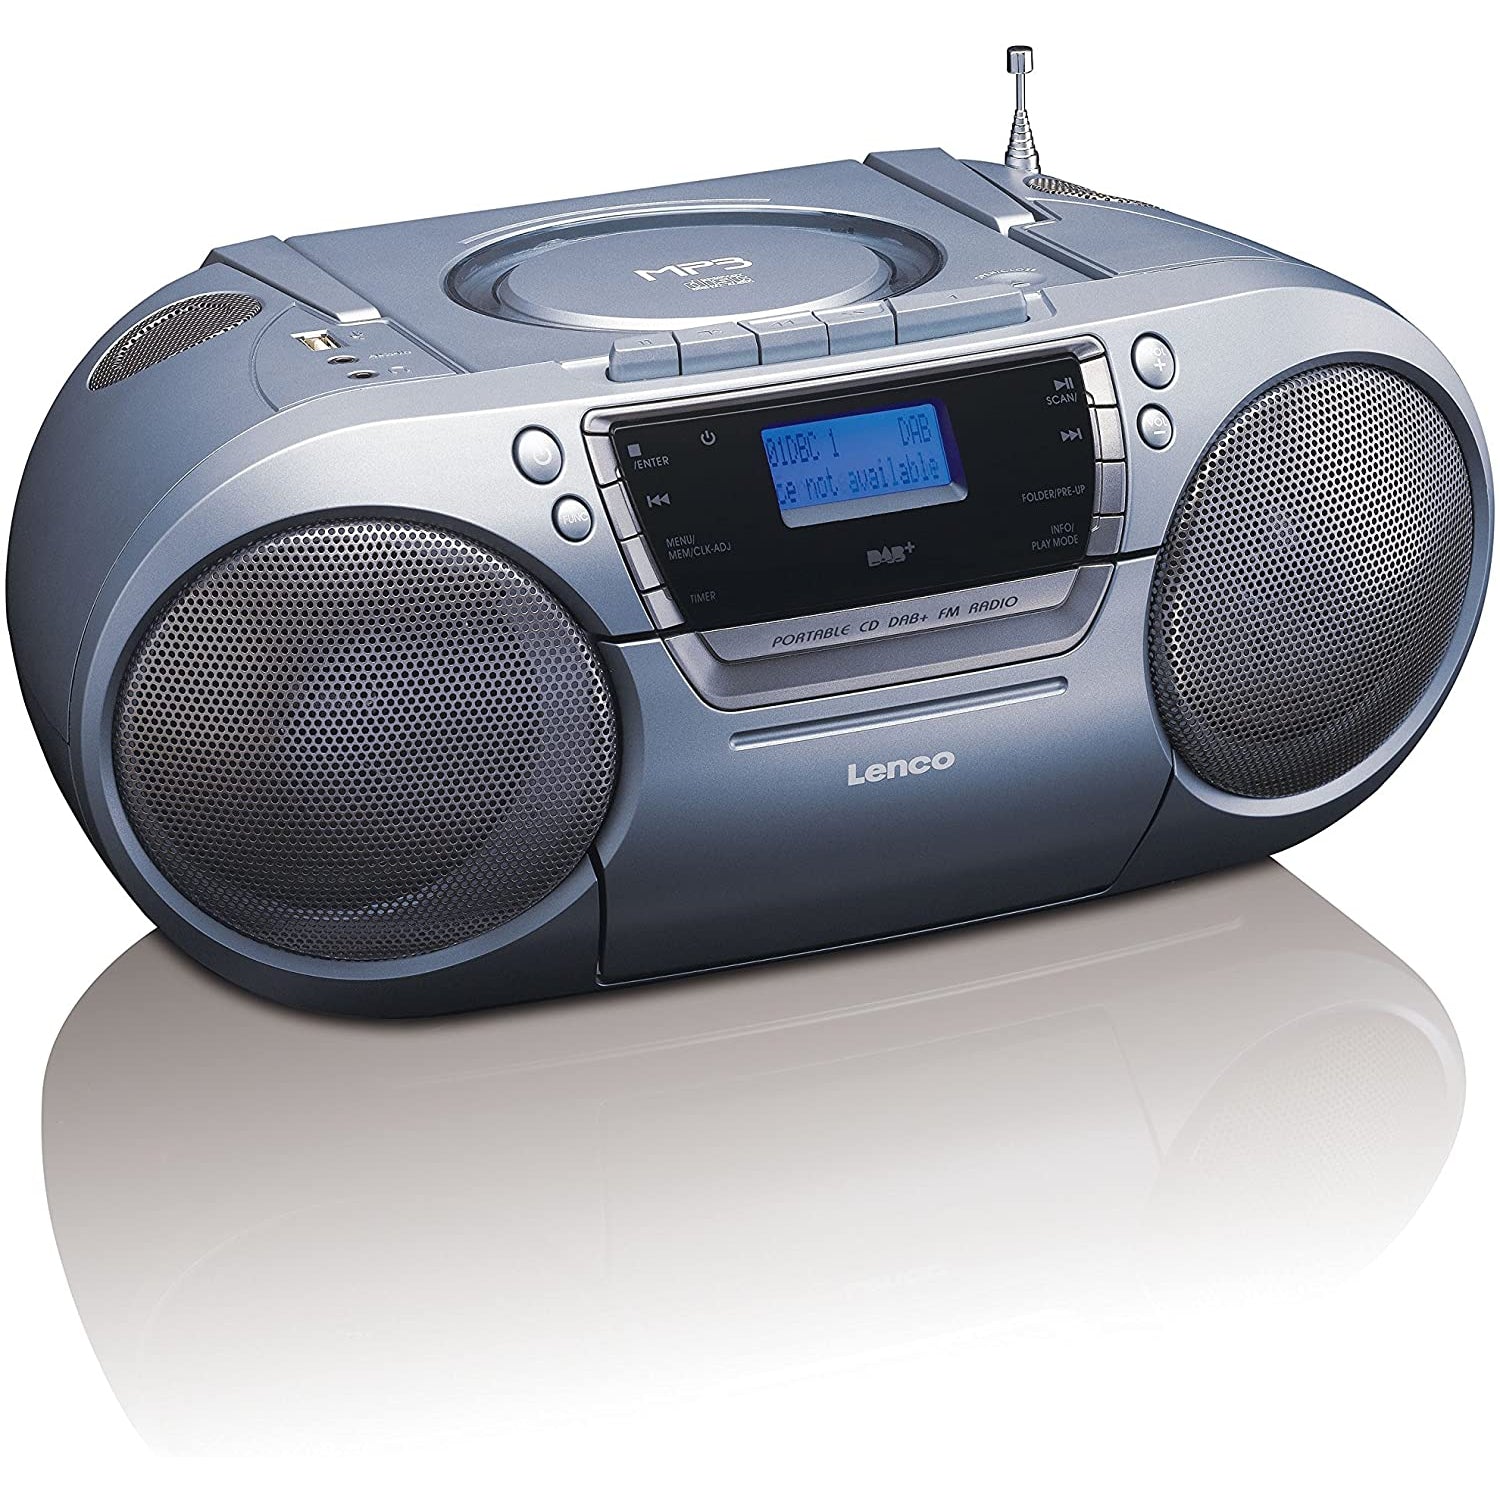 Lenco SCD-680 Silver, Portable Stereo DAB+ & FM Radio with CD, Cassette and USB Player, Grey Boombox